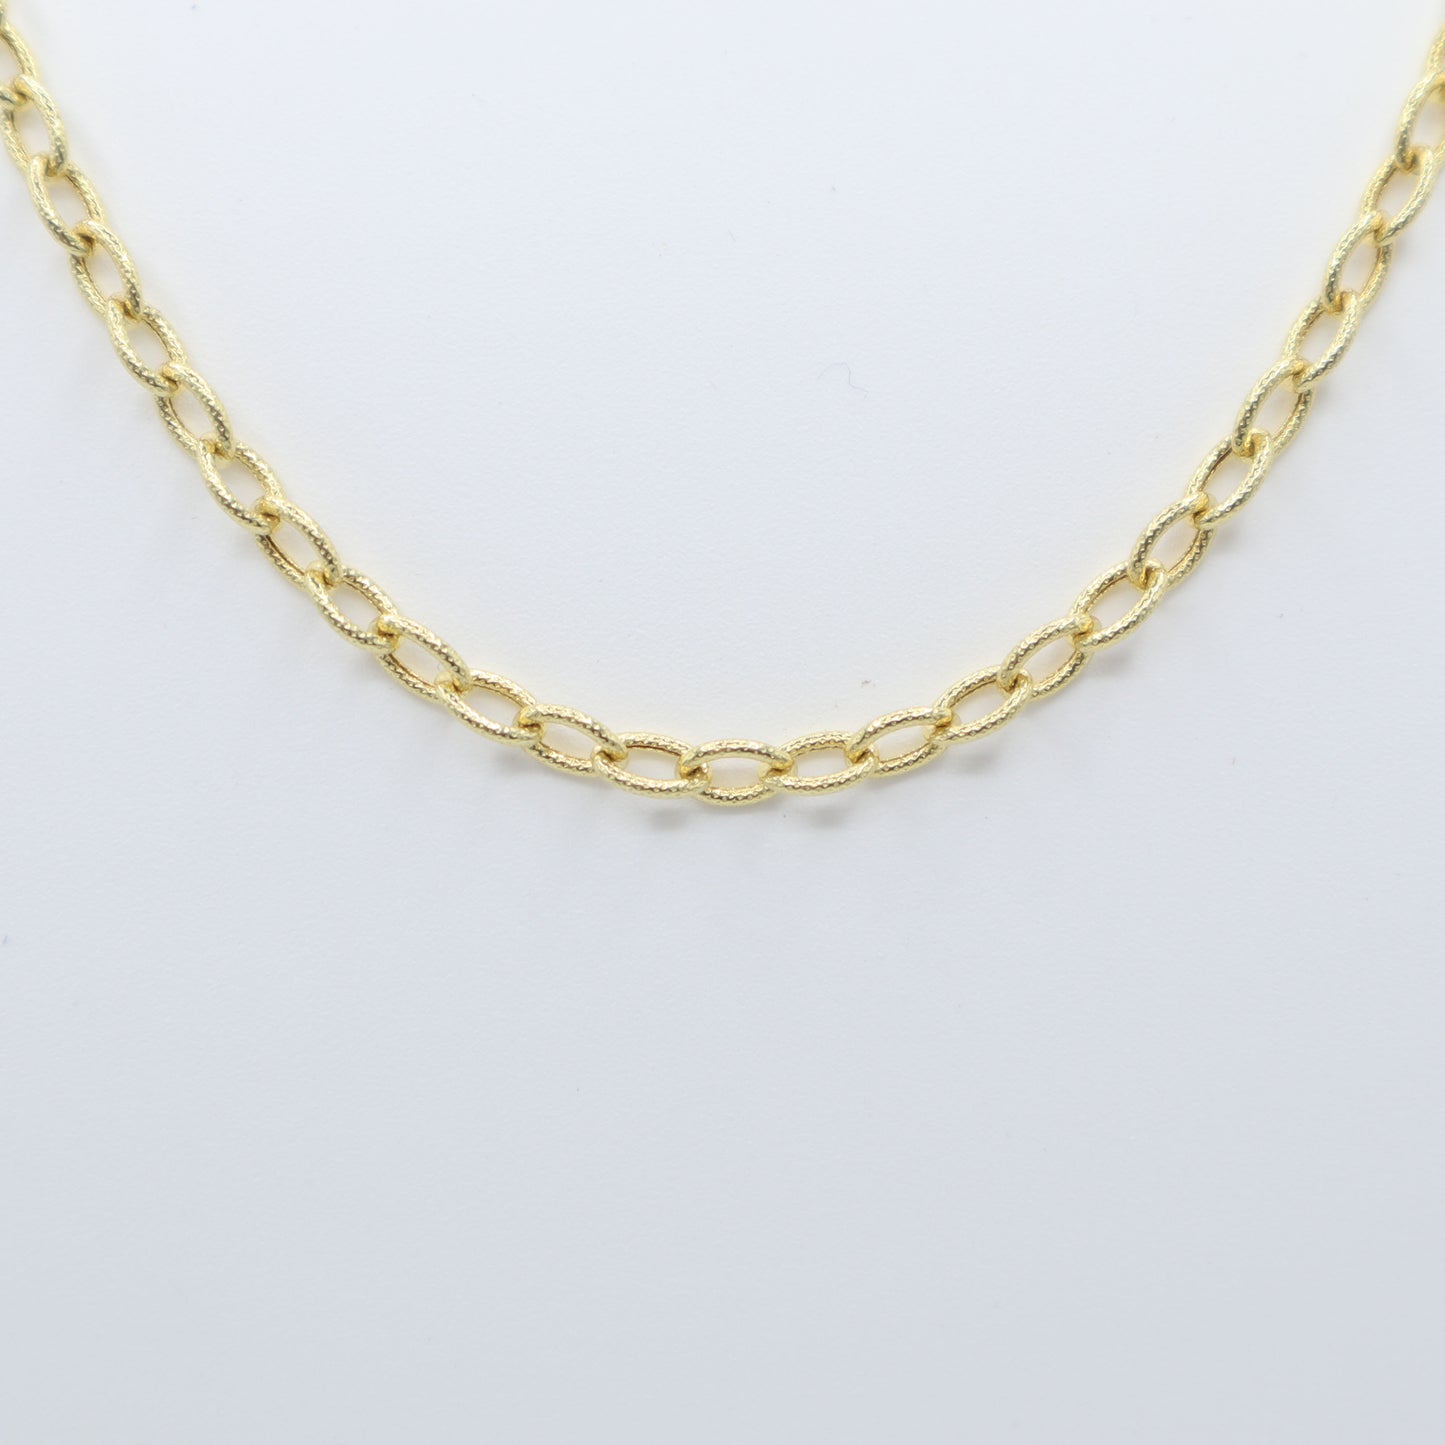 Gold Oval Link Chain 20"